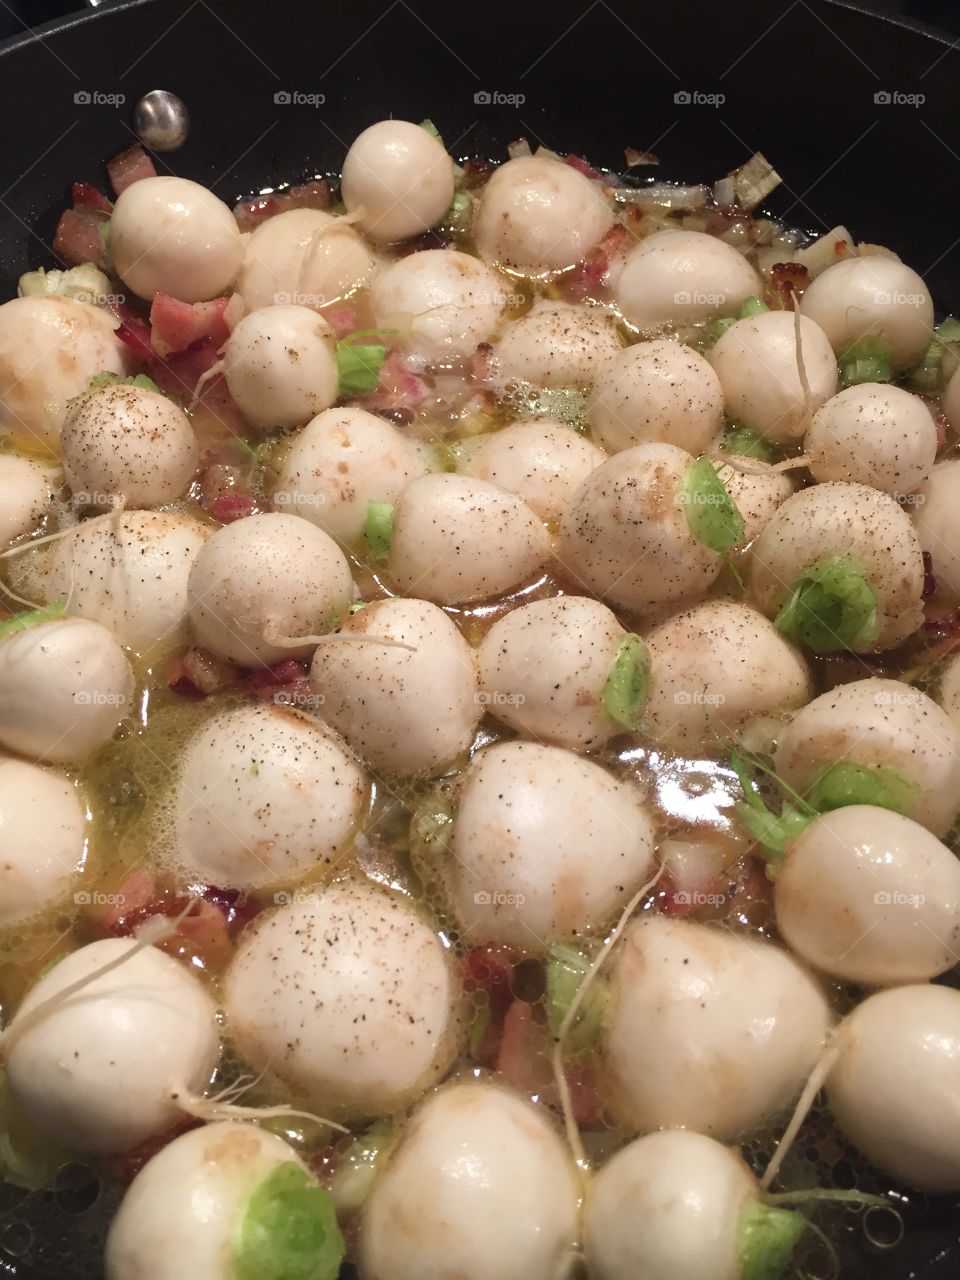 Braised turnips with bacon